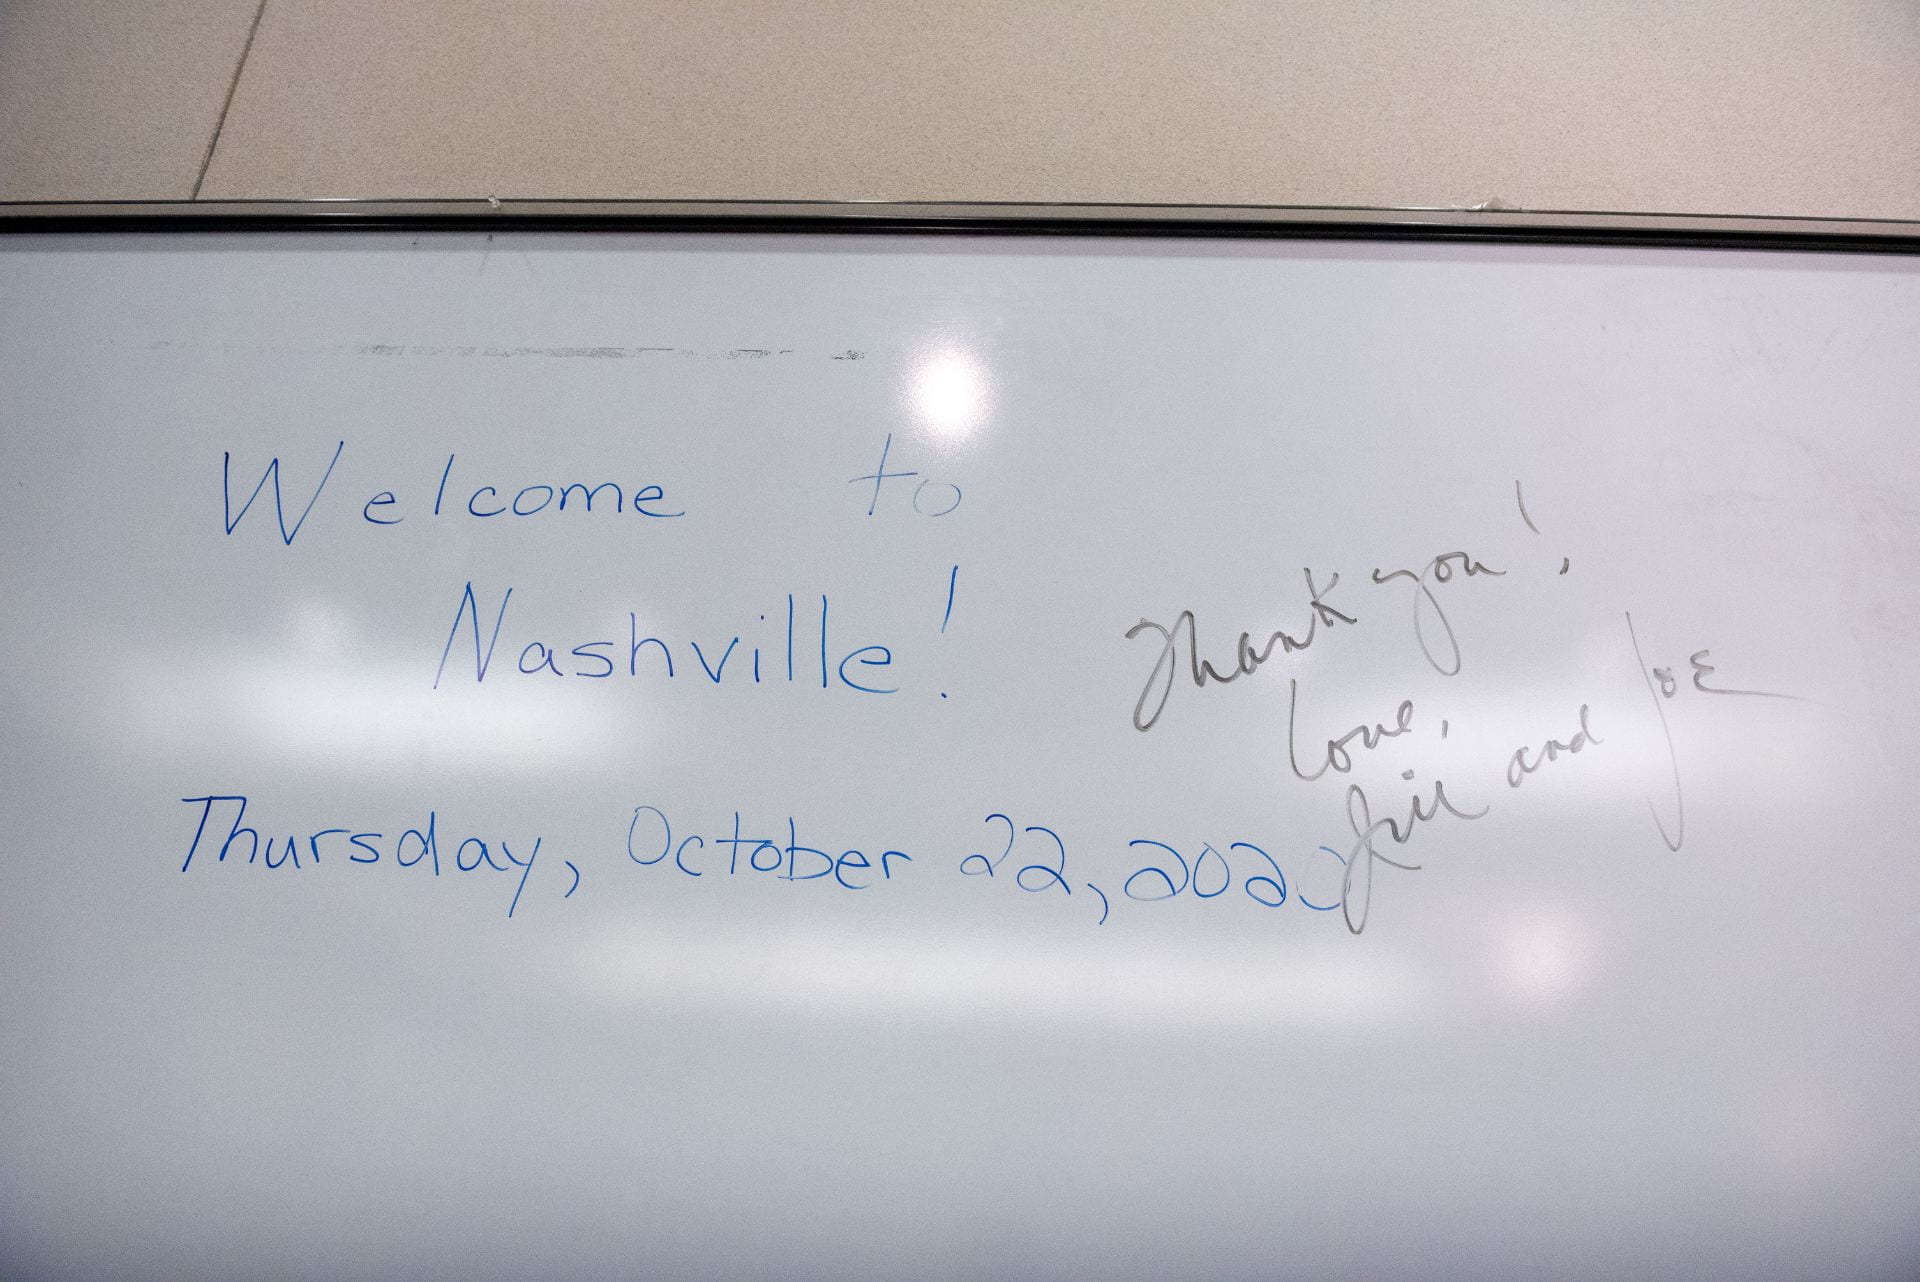 Whiteboard saying "Welcome to Nashville" signed with a thank you from Jill and Joe Biden